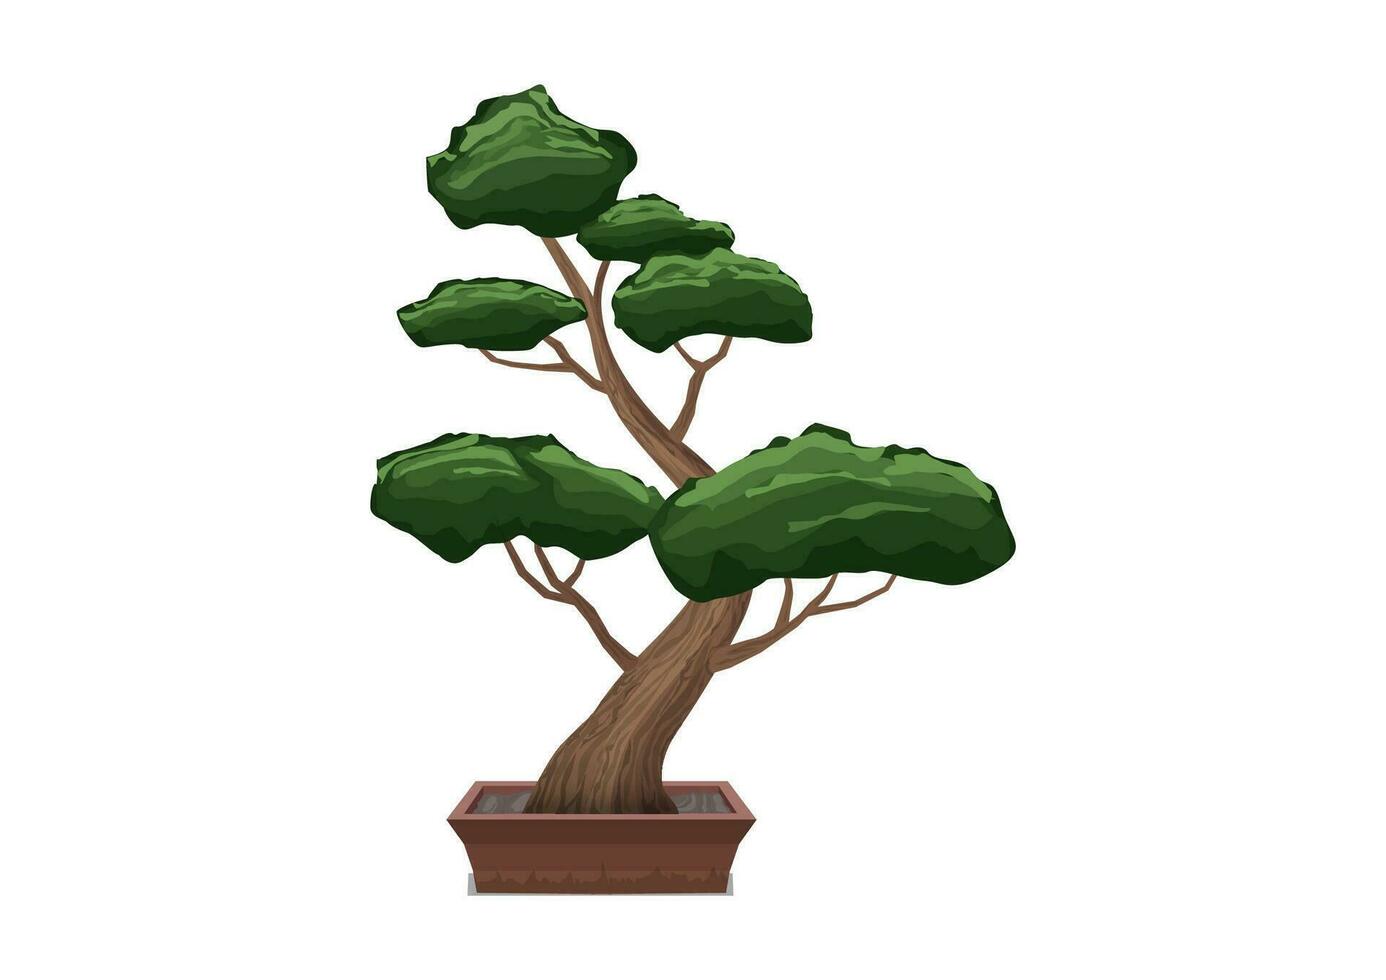 bonsai trees grown in containers. vector